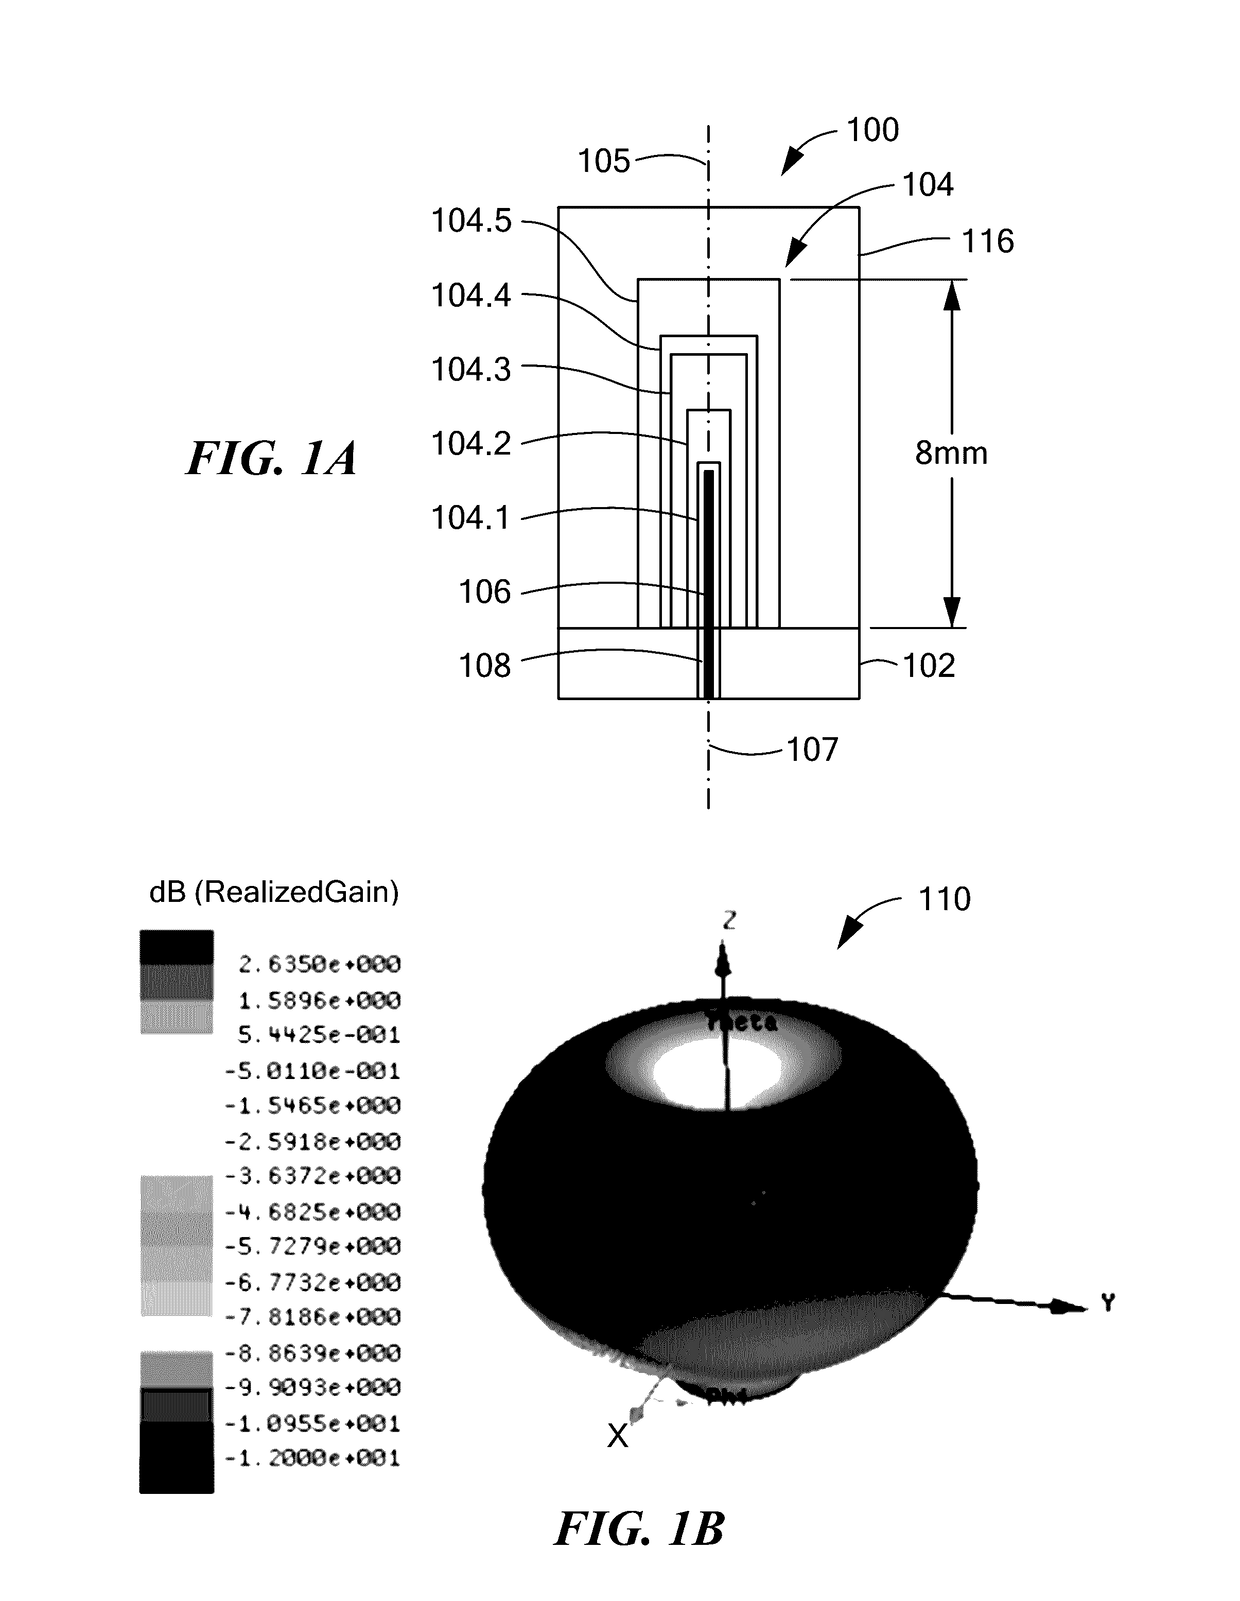 Broadband multiple layer dielectric resonator antenna and method of making the same